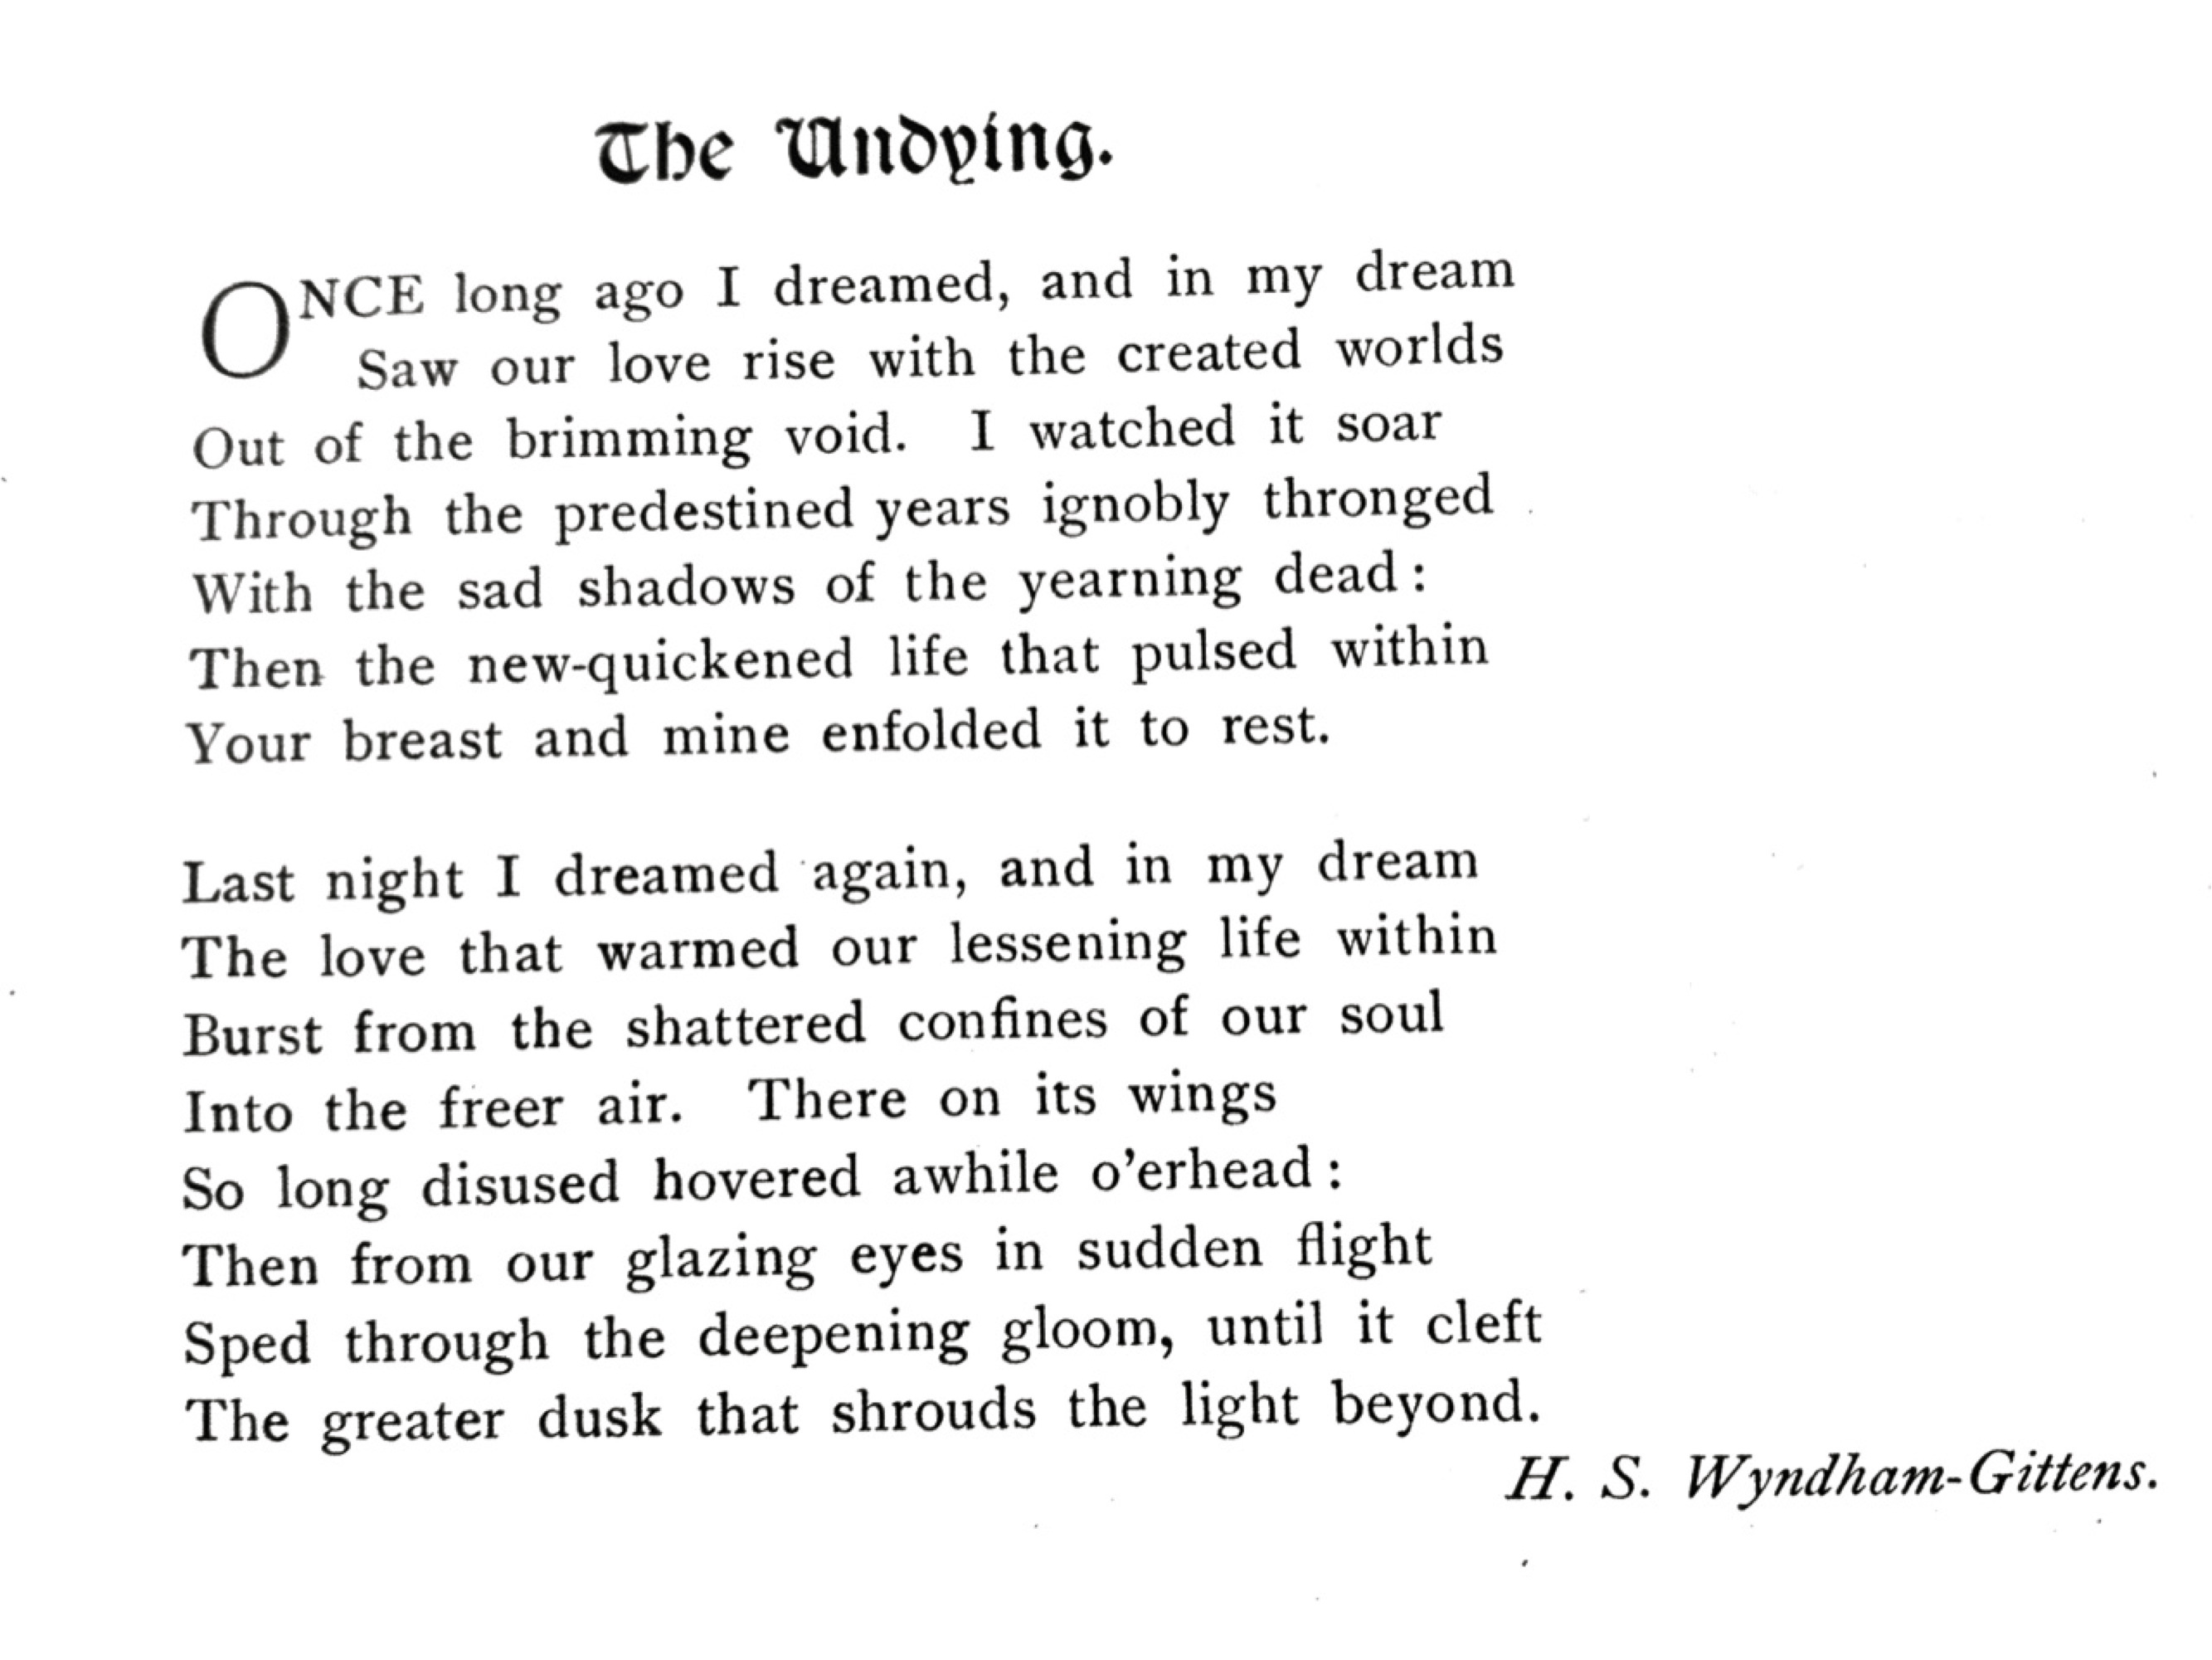 representative poems the undying from 1905 and poem from 1955